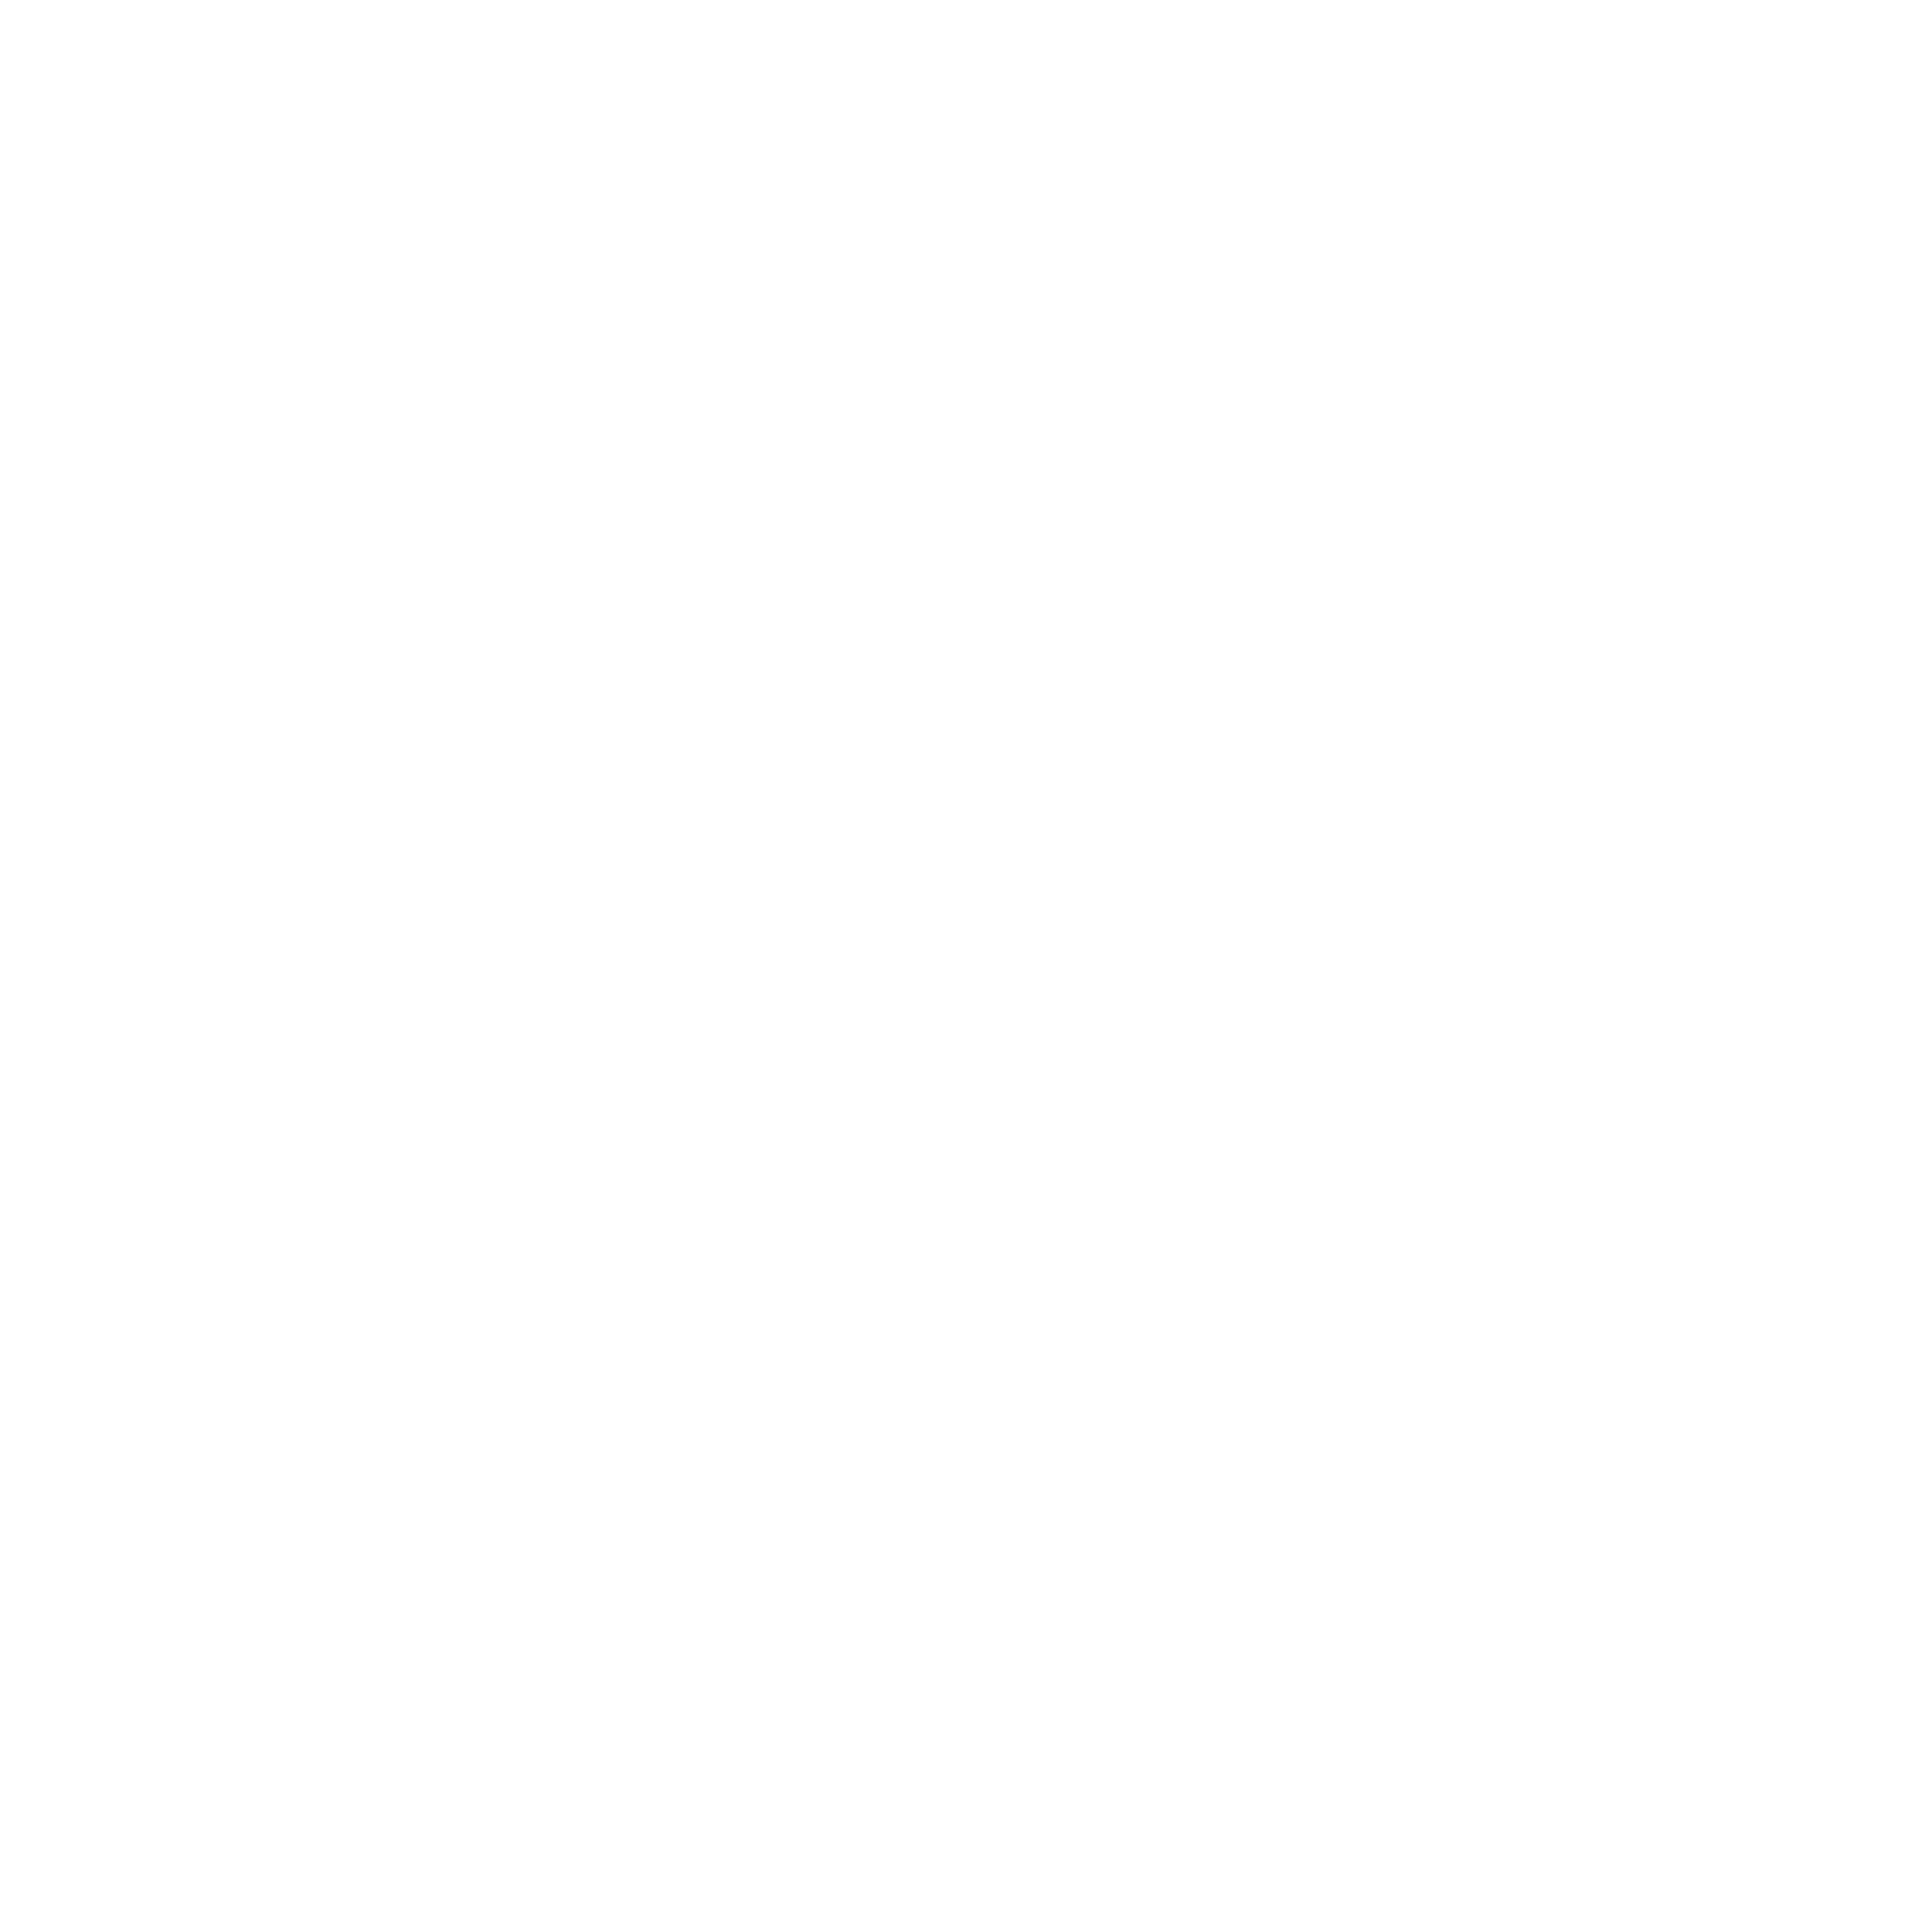 The inclusion tee graphic, spelling out inclusion with an X in the negative space